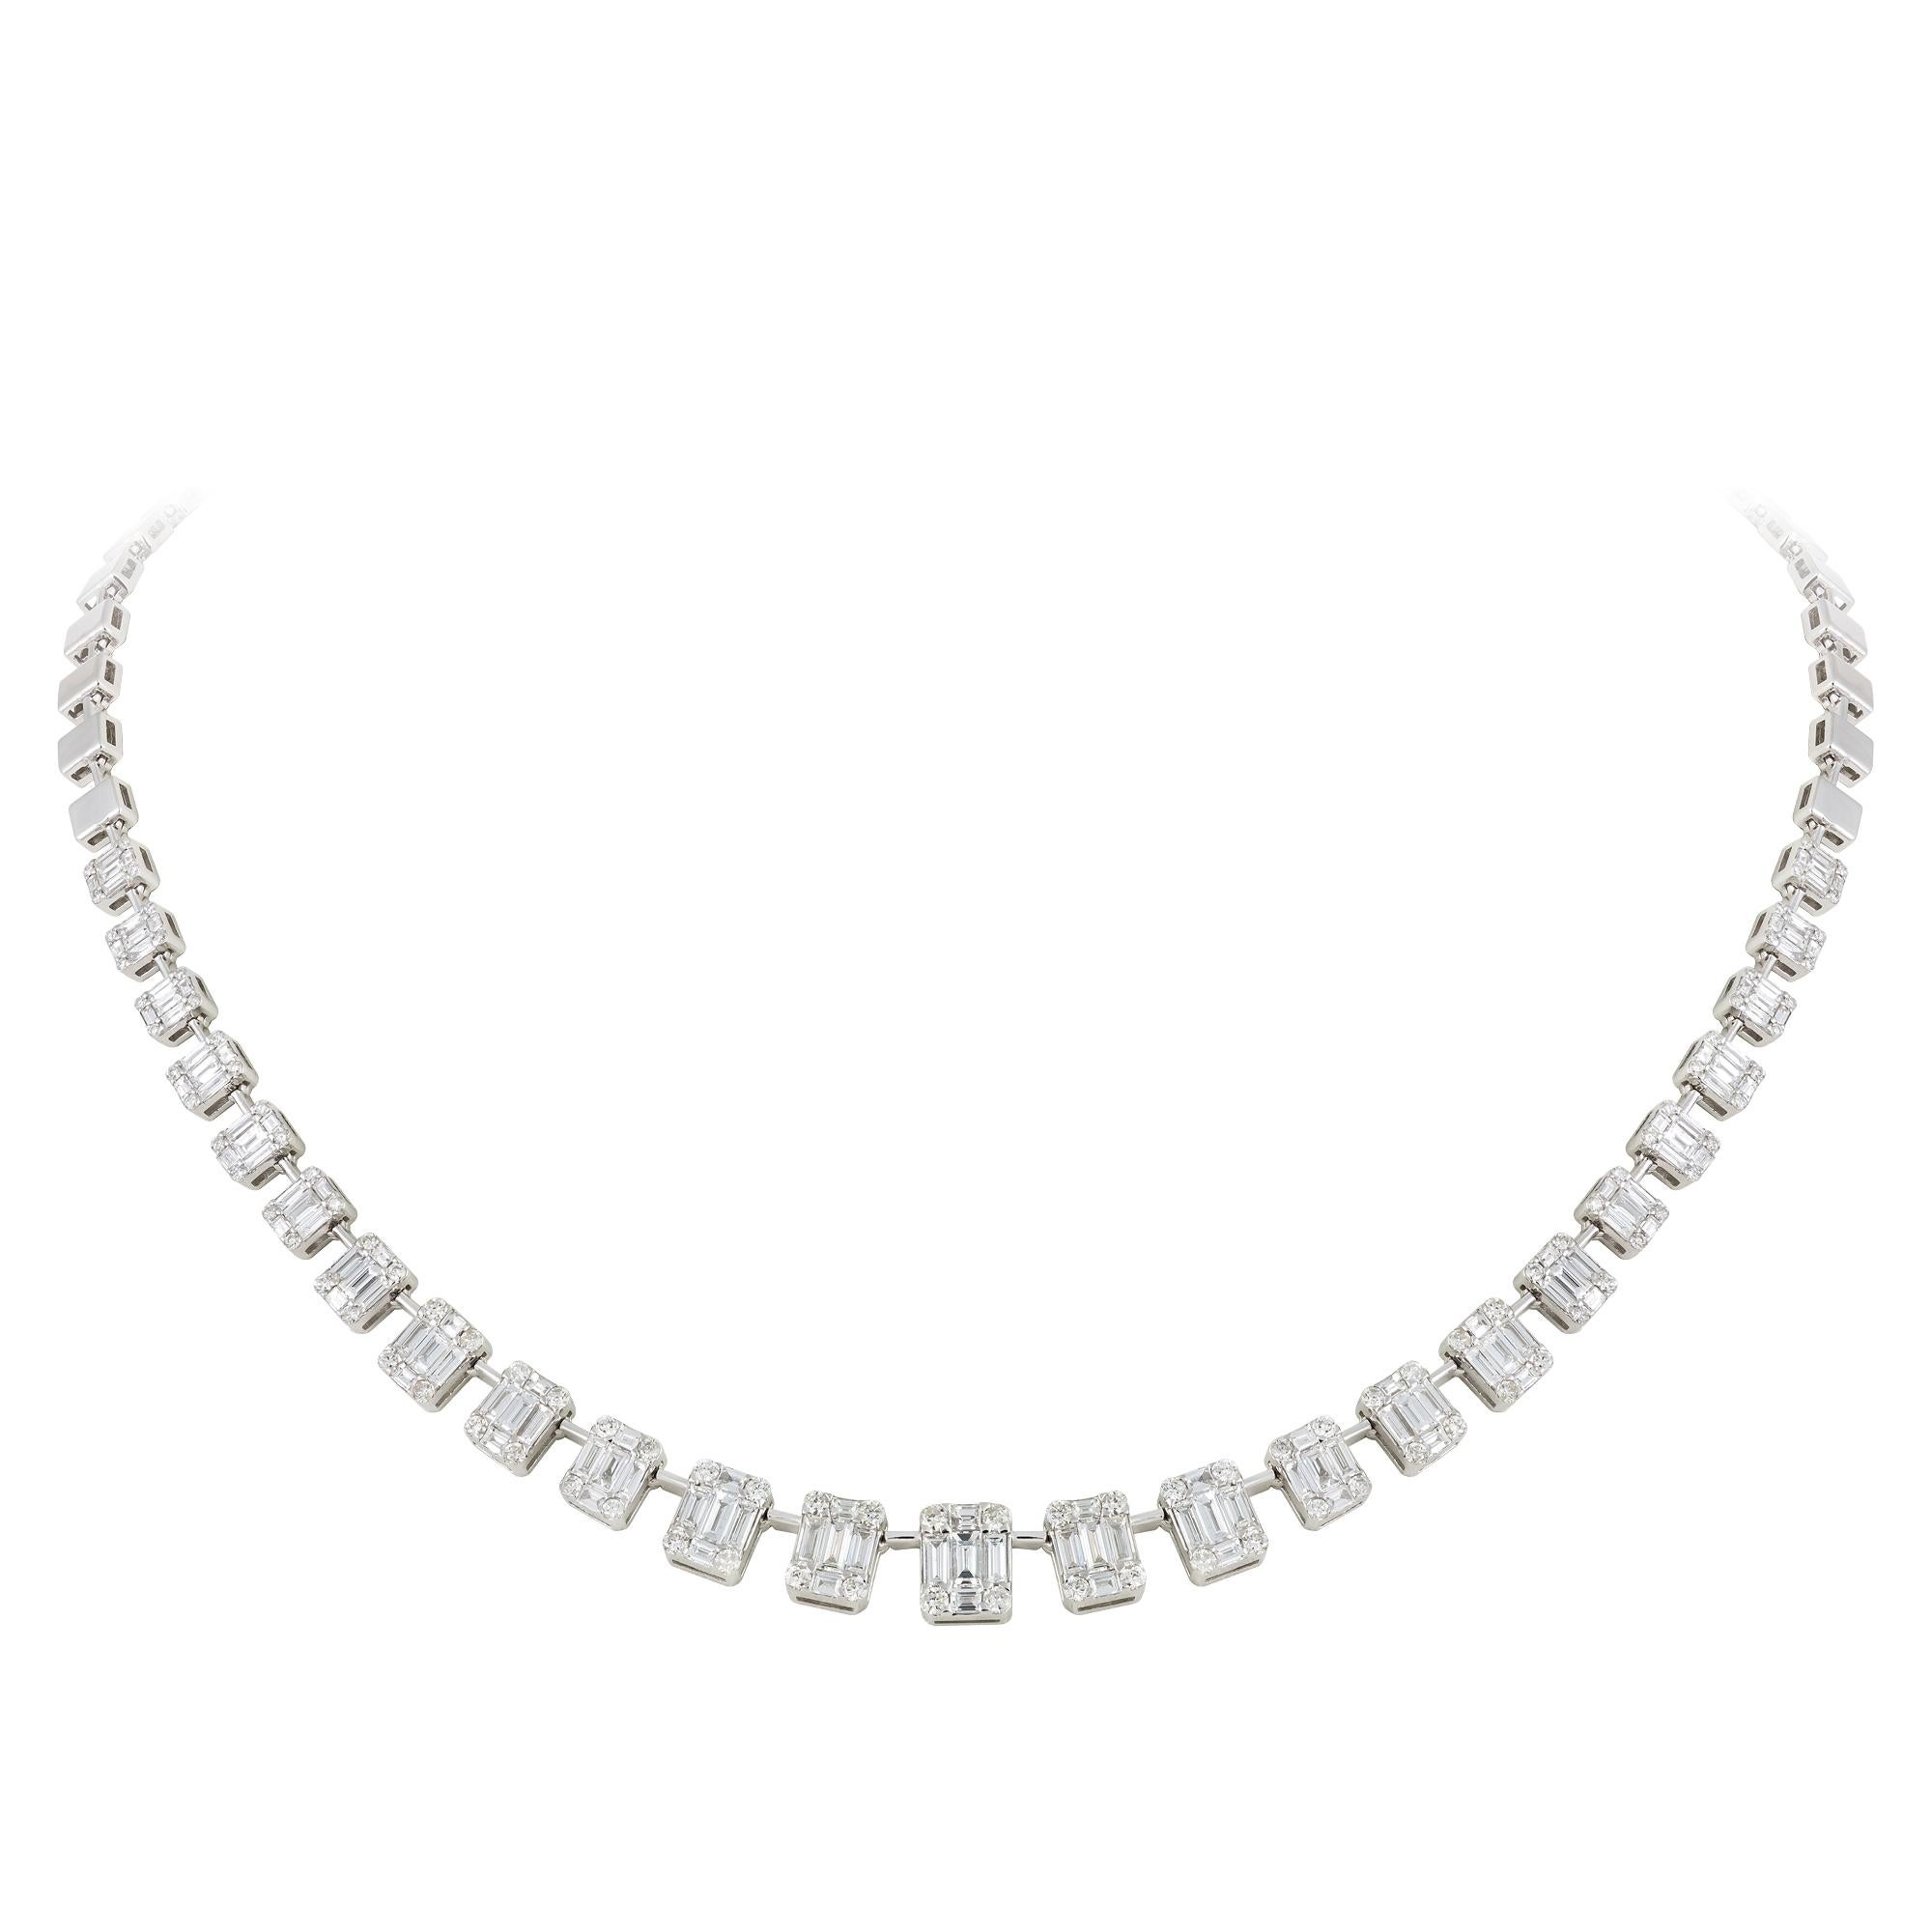 Modern Fashion White Gold 18K Necklace Diamond For Her For Sale